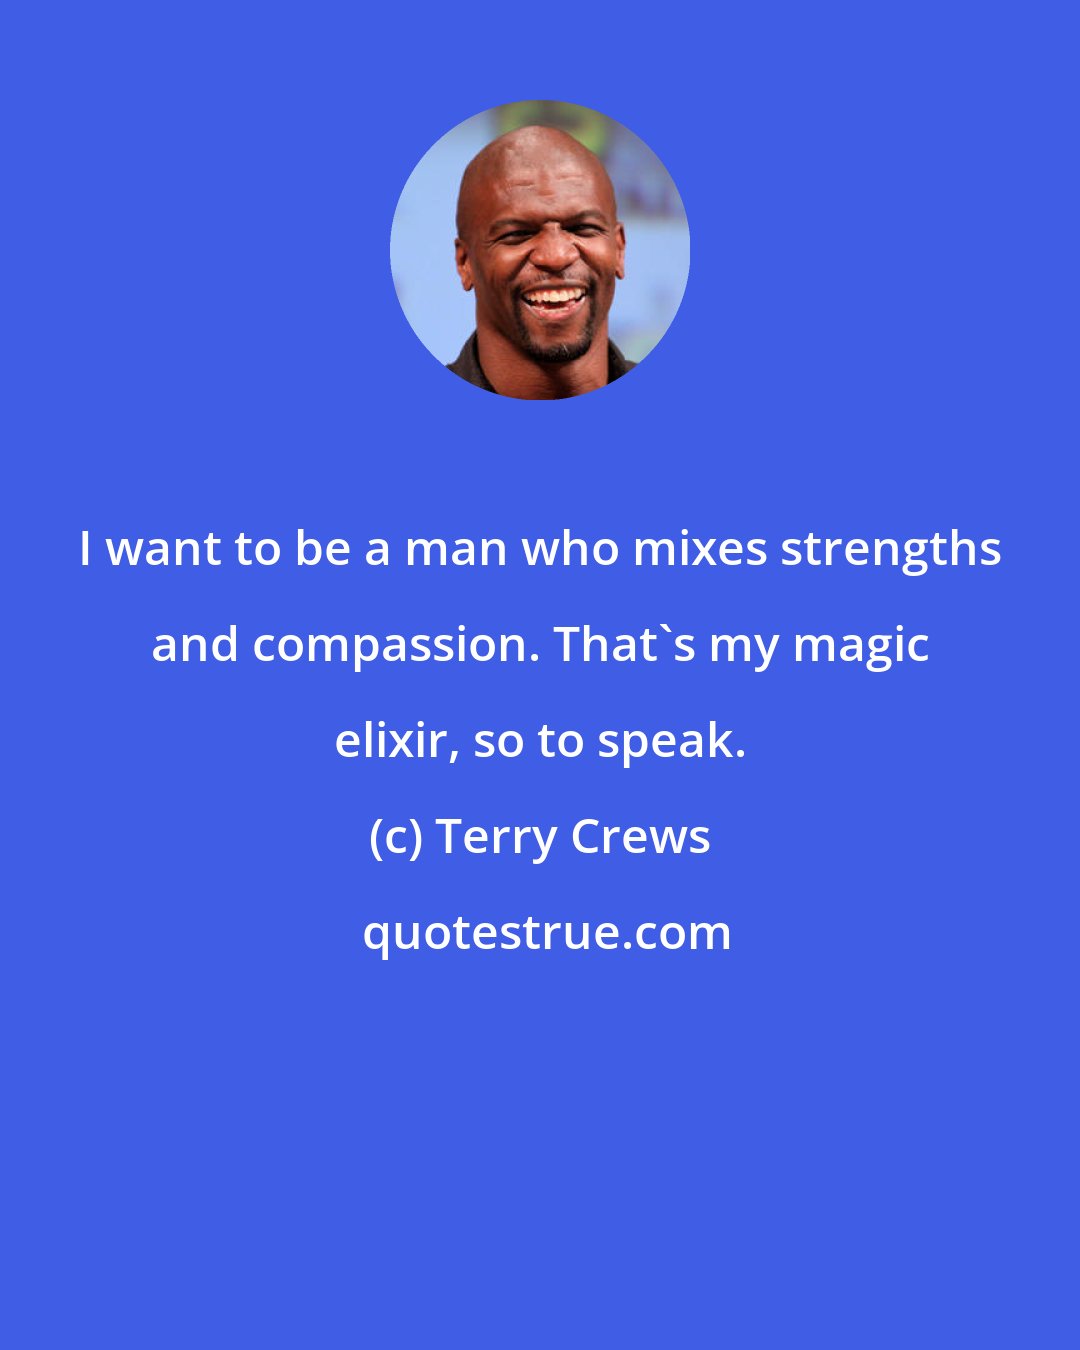 Terry Crews: I want to be a man who mixes strengths and compassion. That's my magic elixir, so to speak.